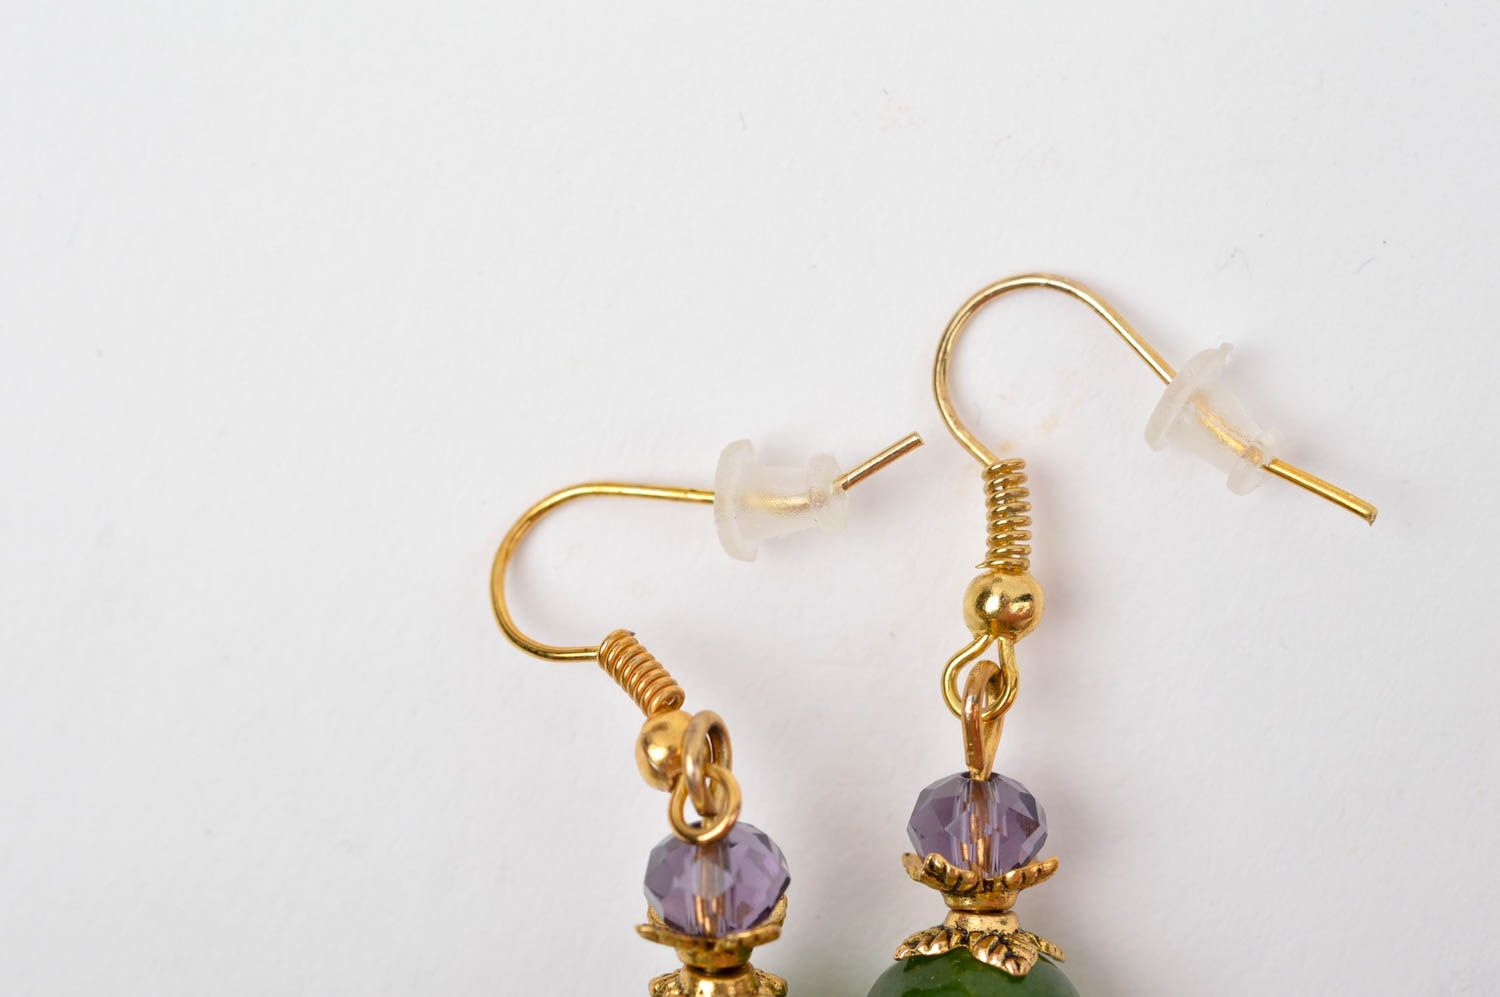 Handmade dangling earrings with natural stones stylish accessories for girls photo 4